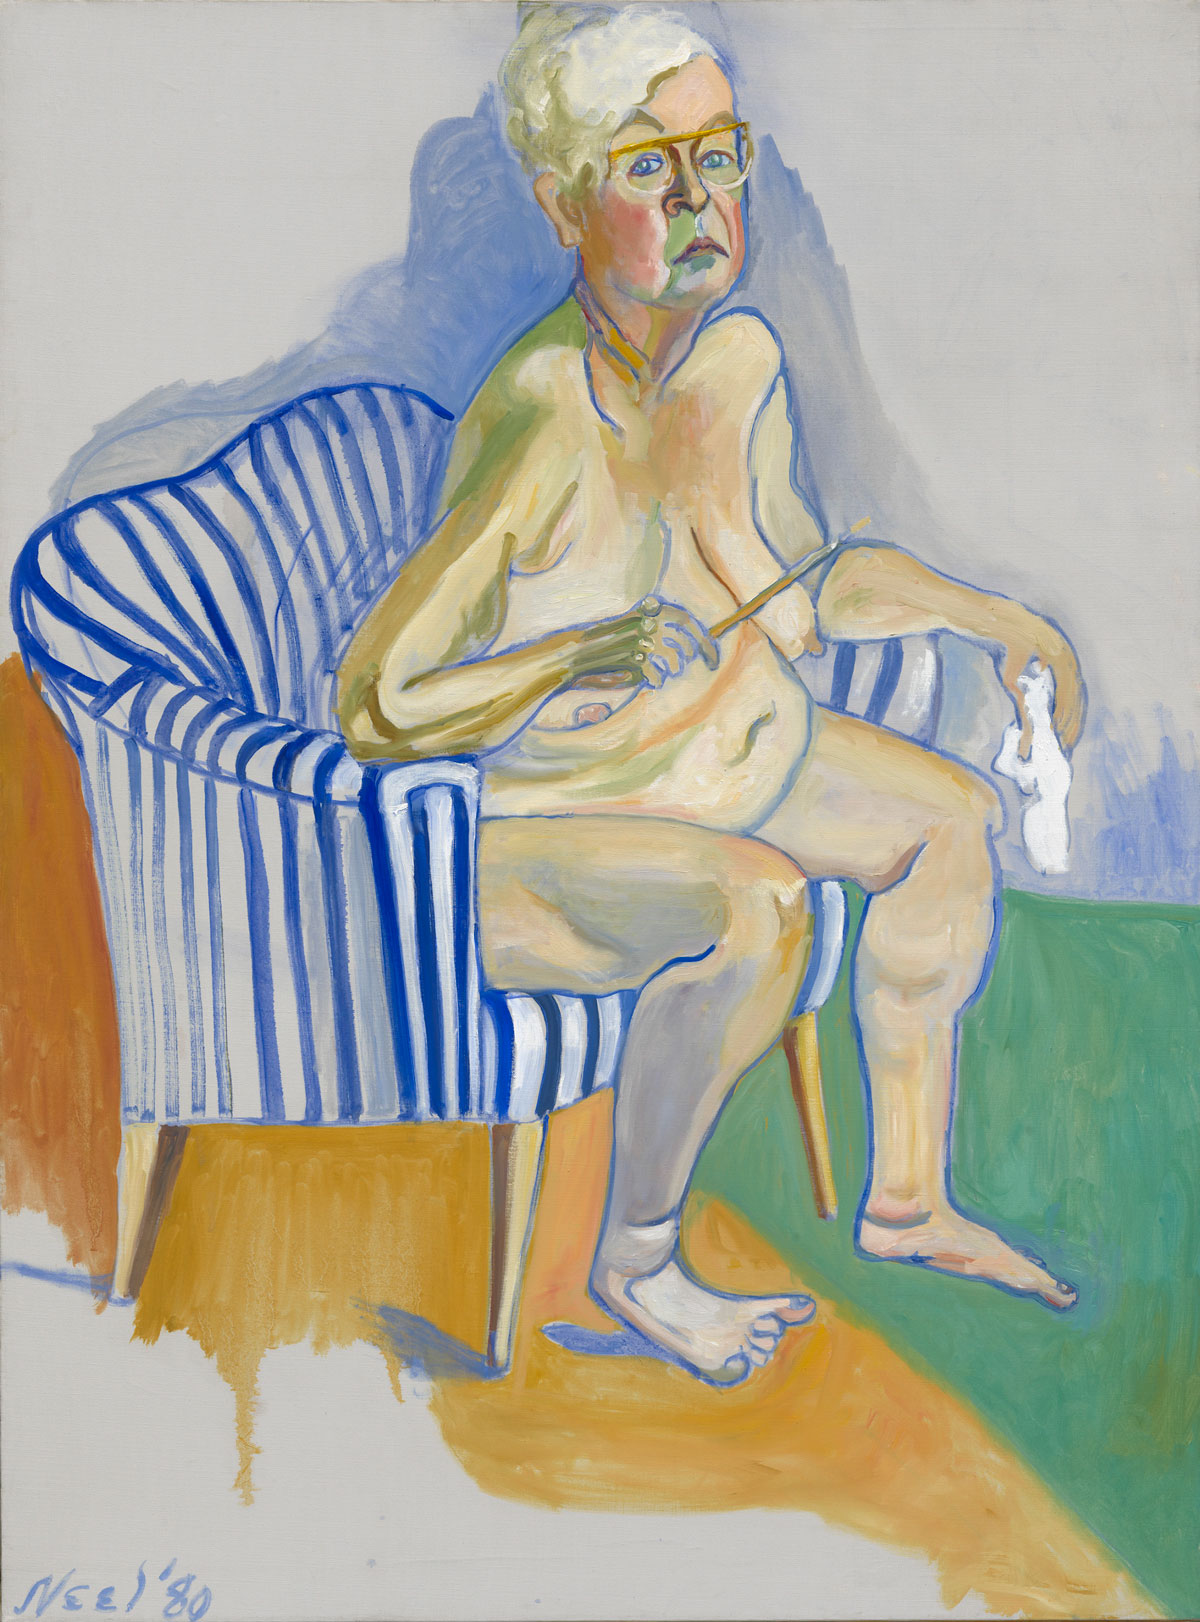 Painting of nude older woman holding paint brush in striped chair